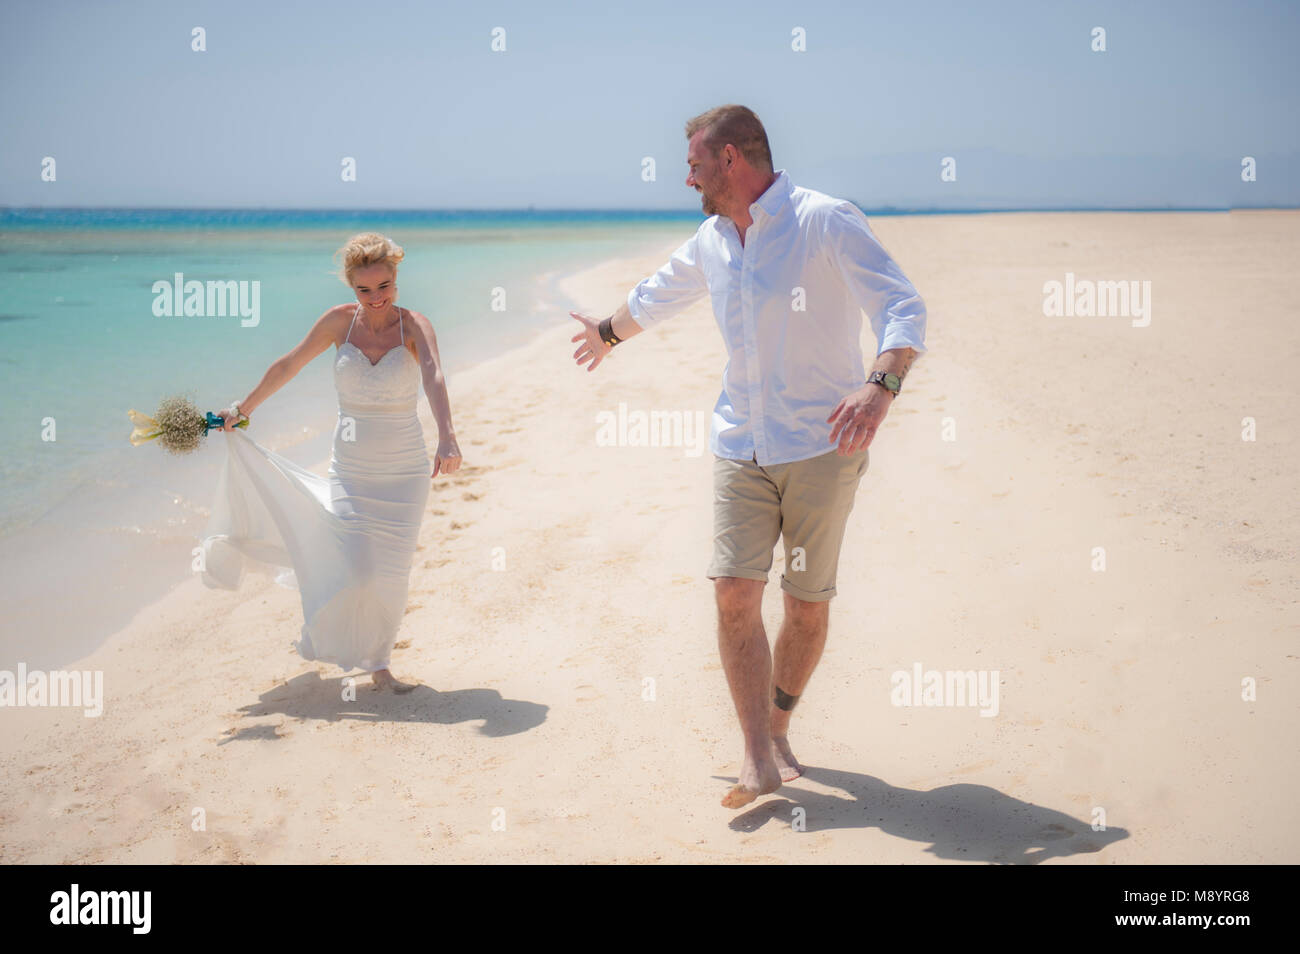 Beautiful couple walking together at a tropical beach paradise on wedding day in white gown dress with ocean view Stock Photo